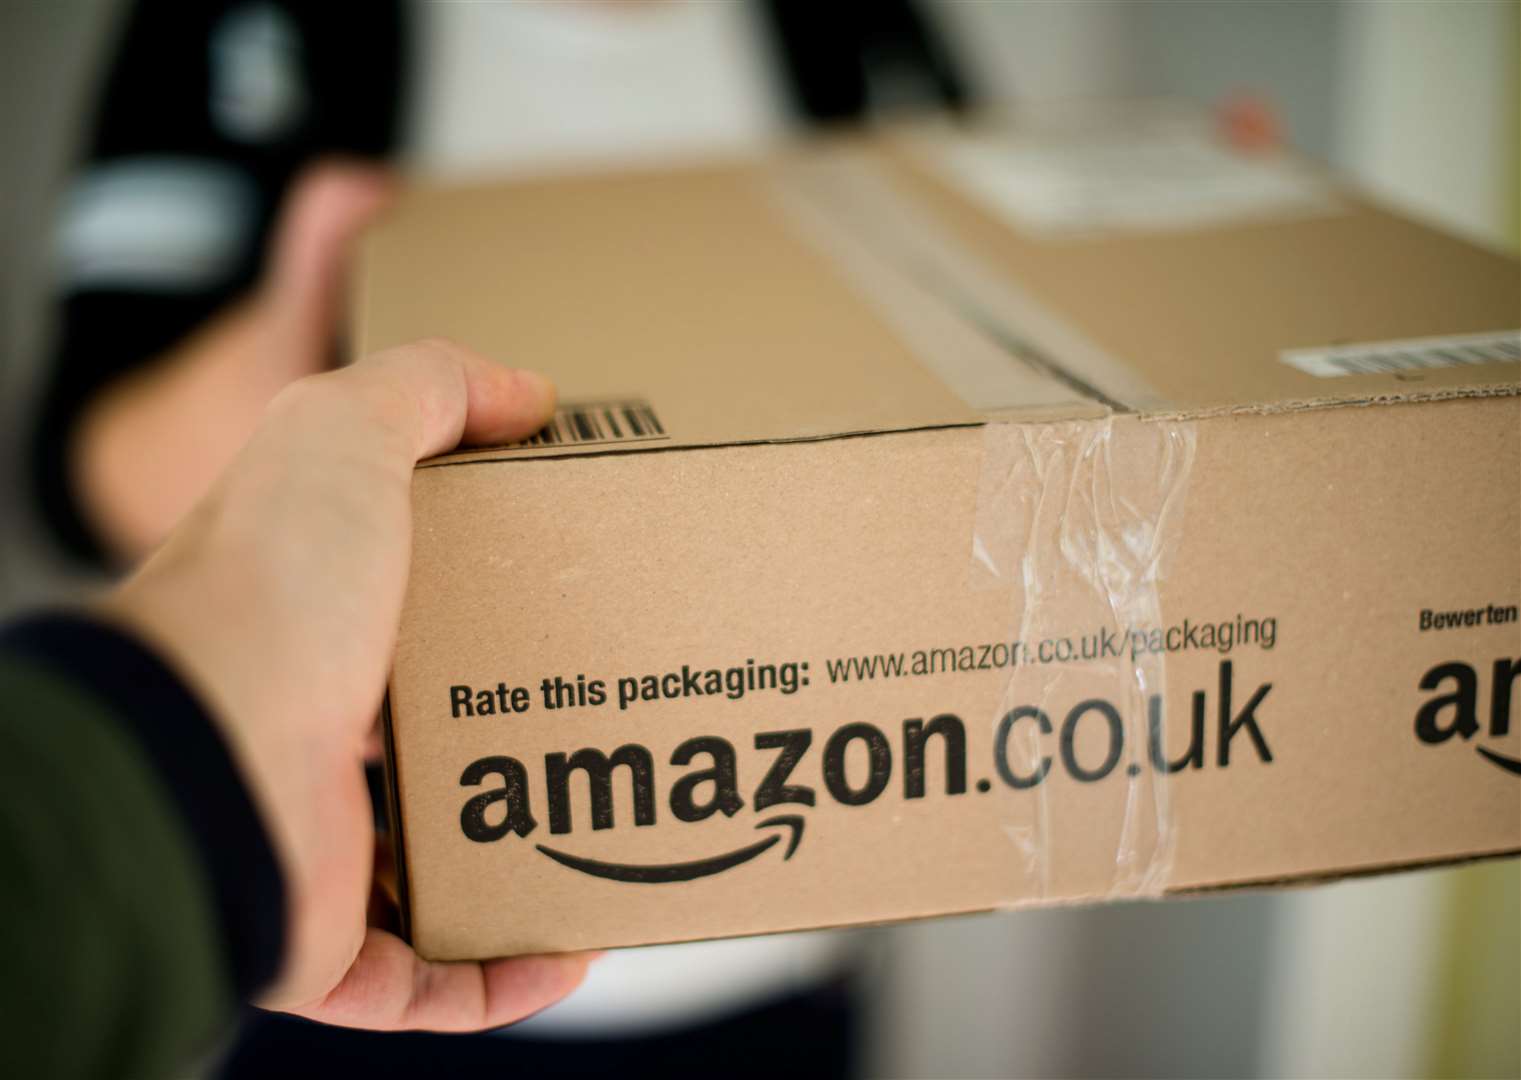 Stuart Turnbull took an Amazon parcel which contained dog treats as well as a large bag of dog food. Image: iStock